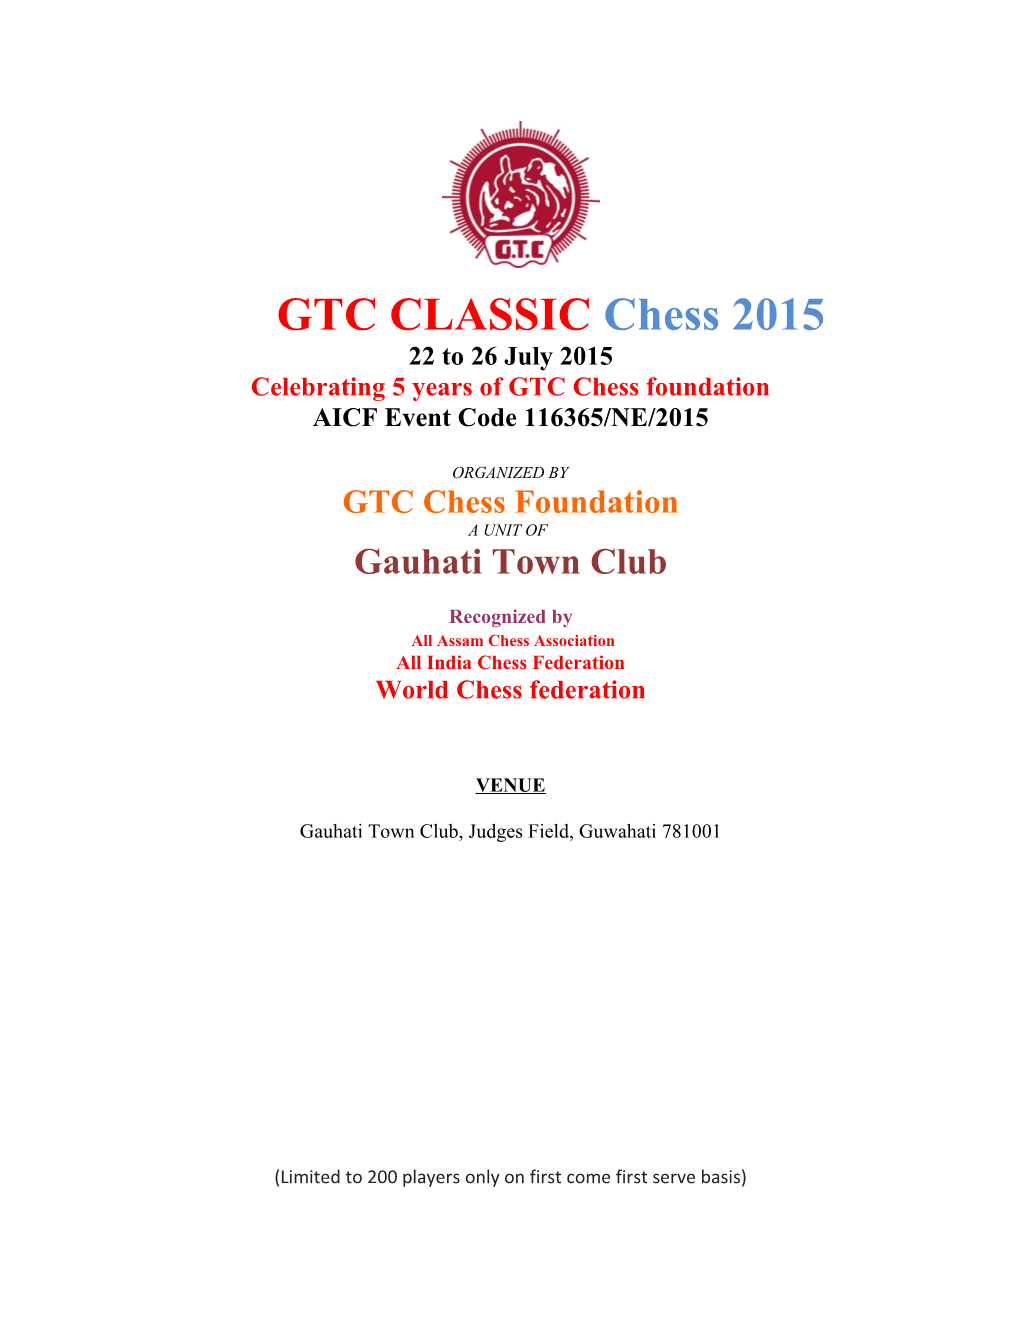 Celebrating 5 Years of GTC Chess Foundation